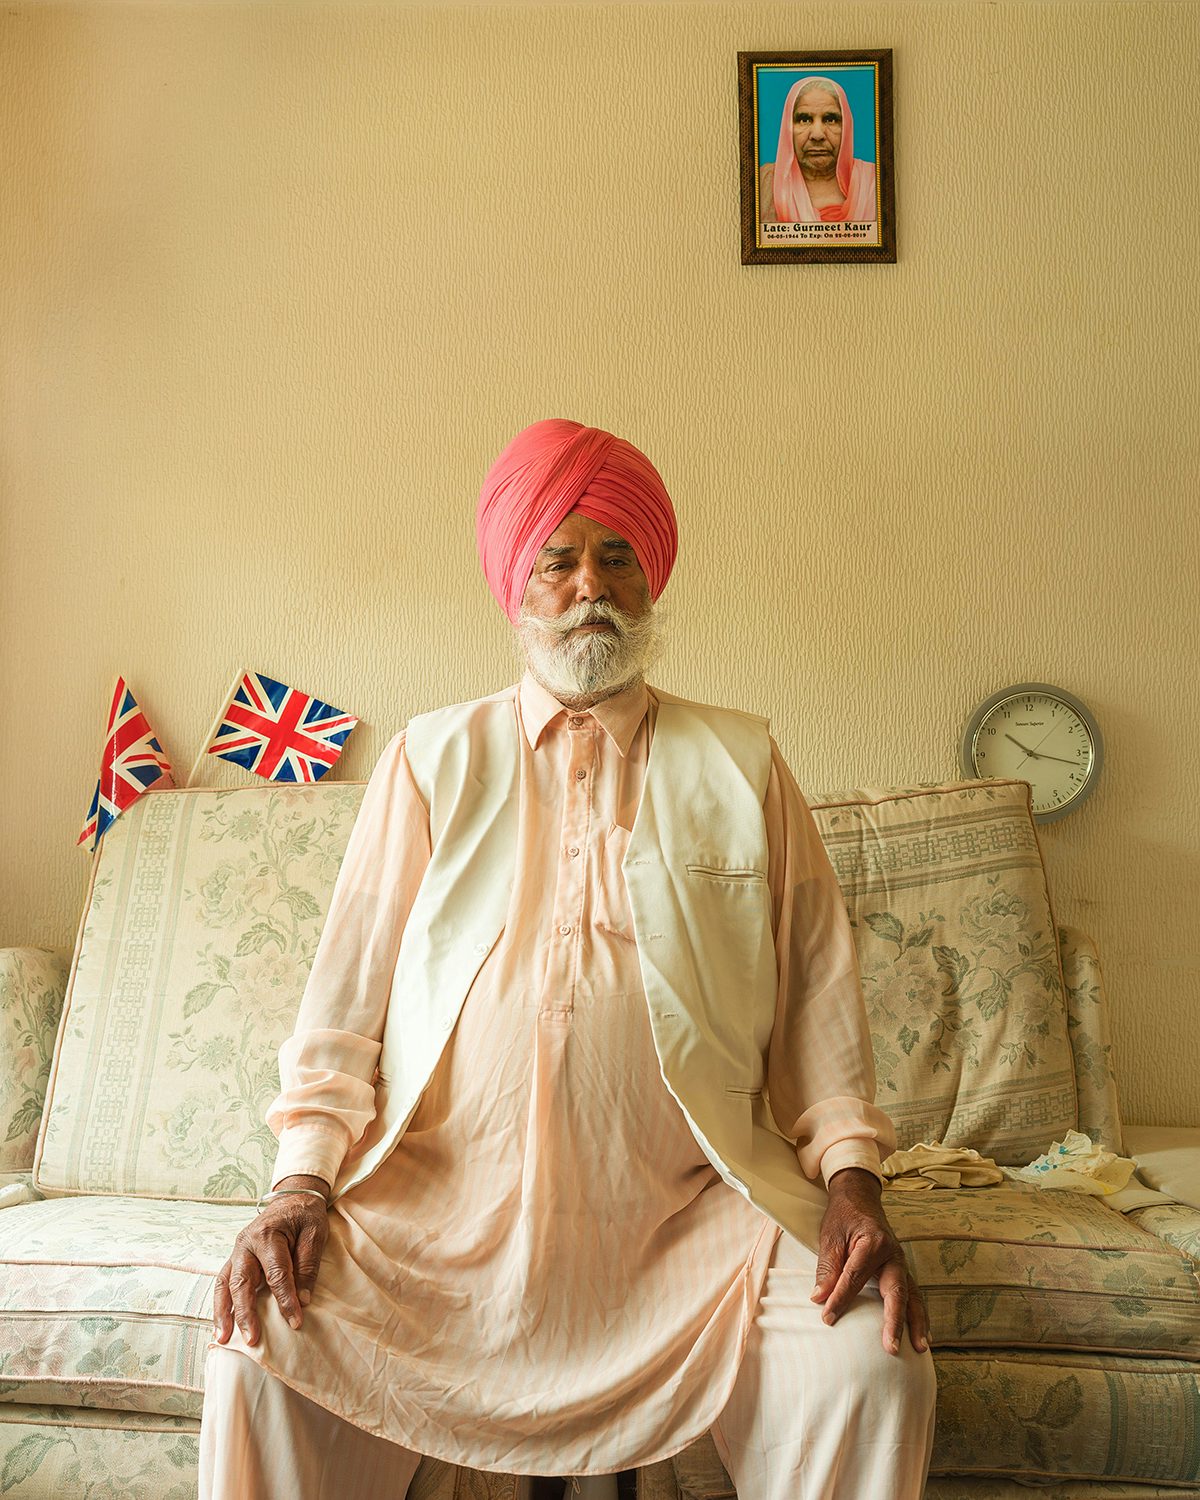 Image shows a man sat on a sofa with union jacks in the background, taken from Kavi Pujara's book This Golden Mile